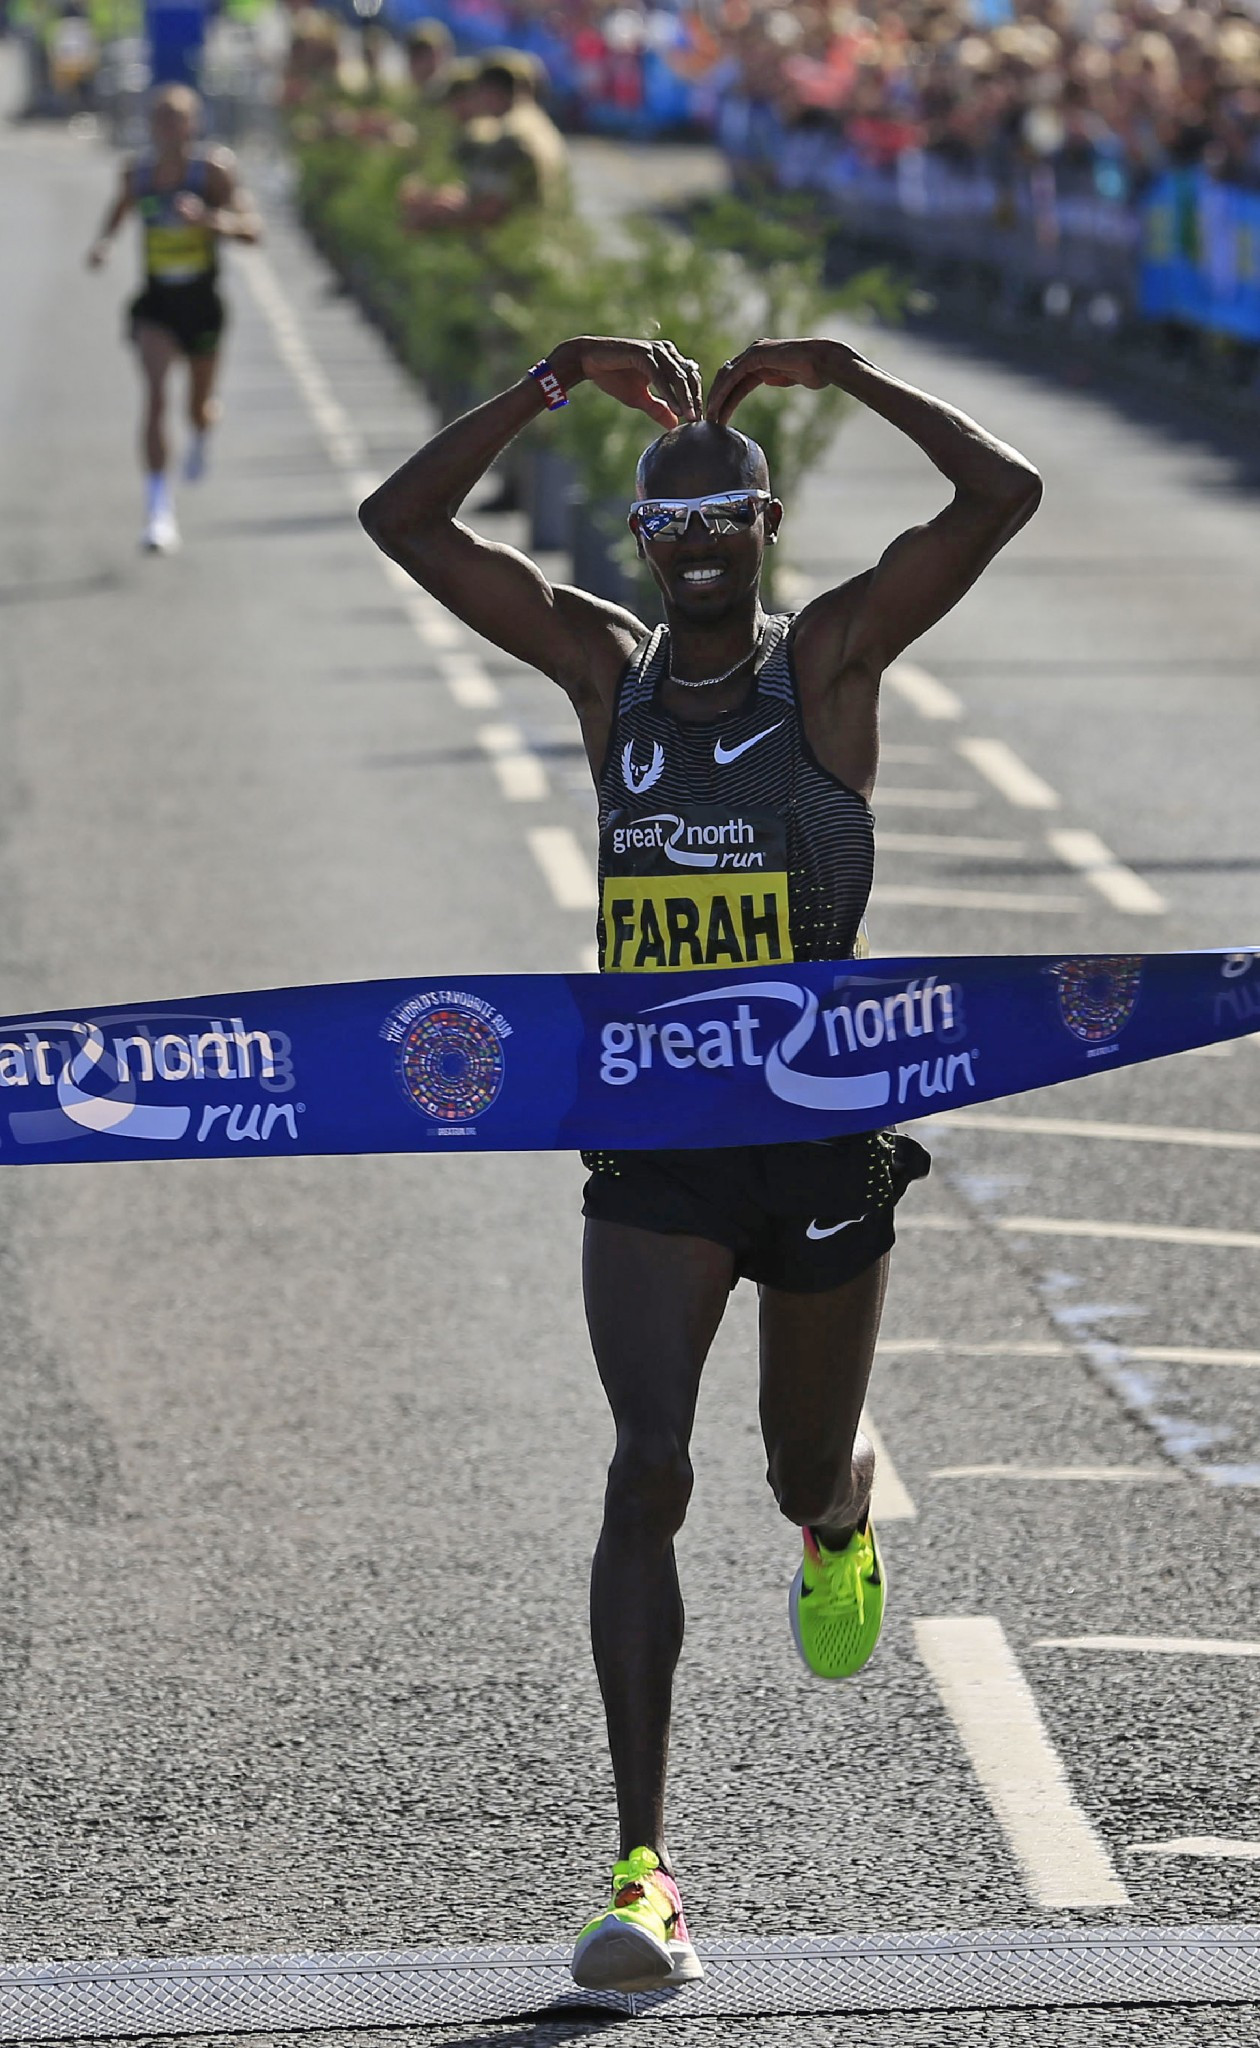 Britain's Sir Mo Farah winning a third consecutive Great North Run title last year - but Ethiopia's Olympic marathon silver medallist Feyisa Lilesa will test his ambitions of winning a fourth title tomorrow ©Getty Images